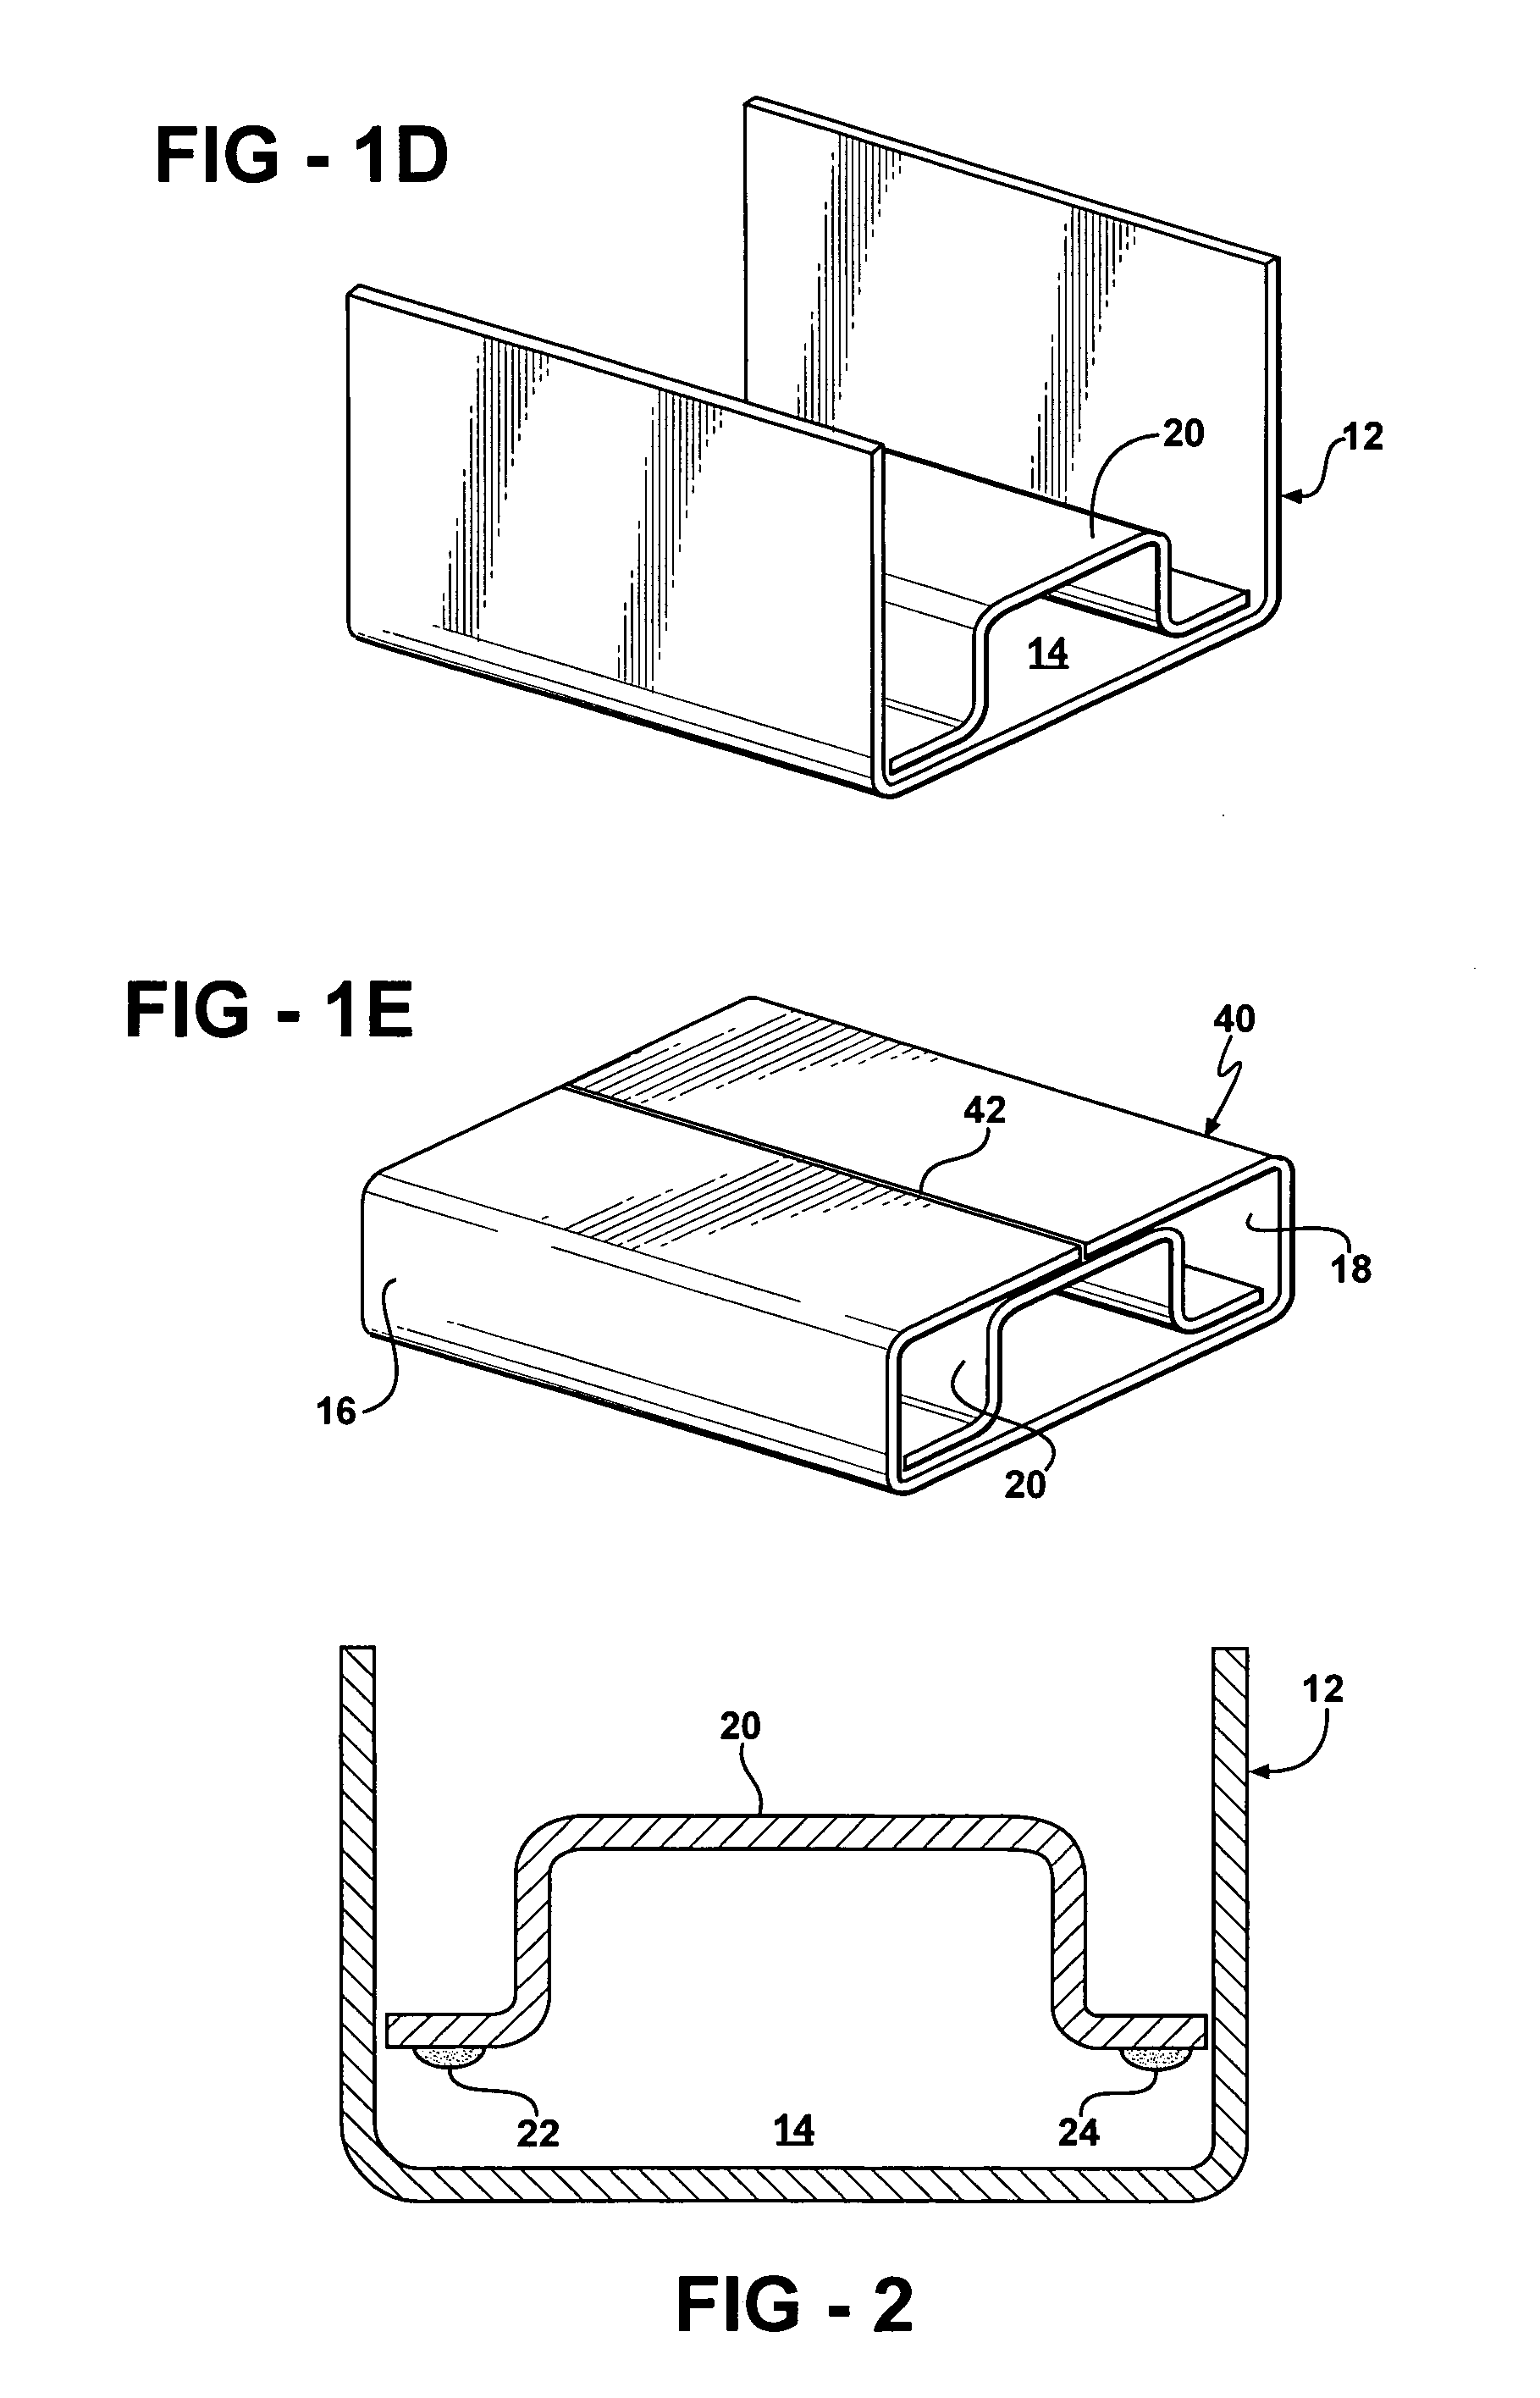 Method for manufacturing a reinforced structural component, and article manufactured thereby